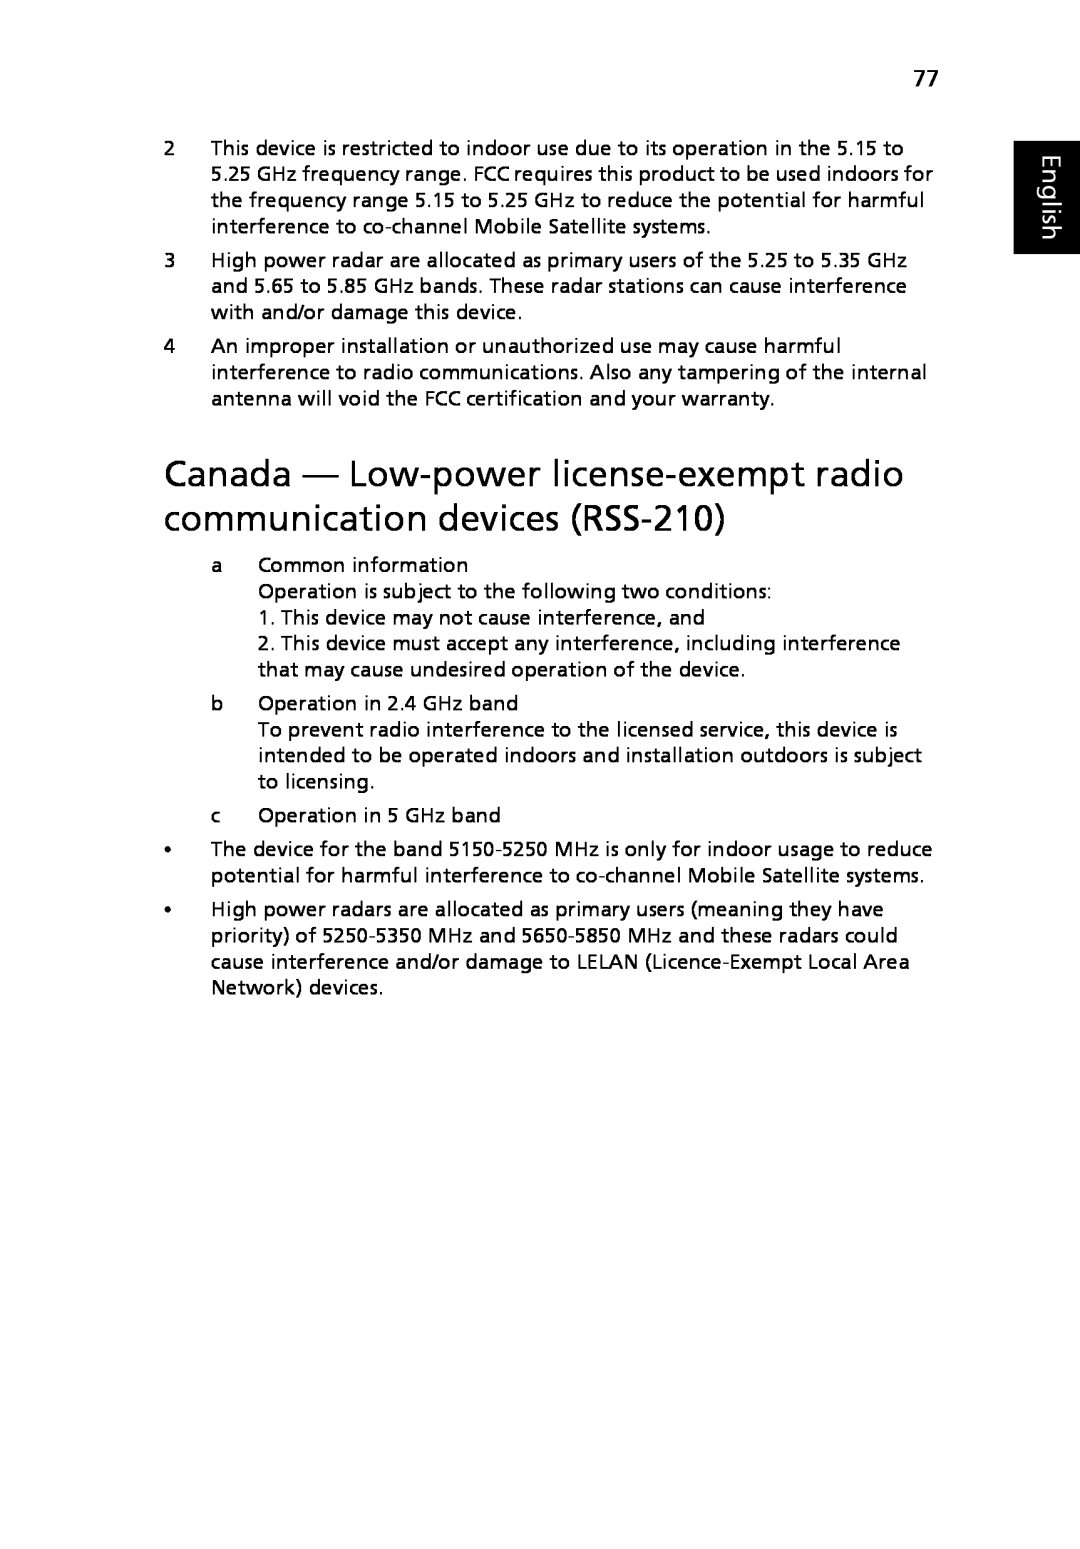 Acer 3040 Series, 3030 Series manual Canada - Low-power license-exempt radio communication devices RSS-210, English 